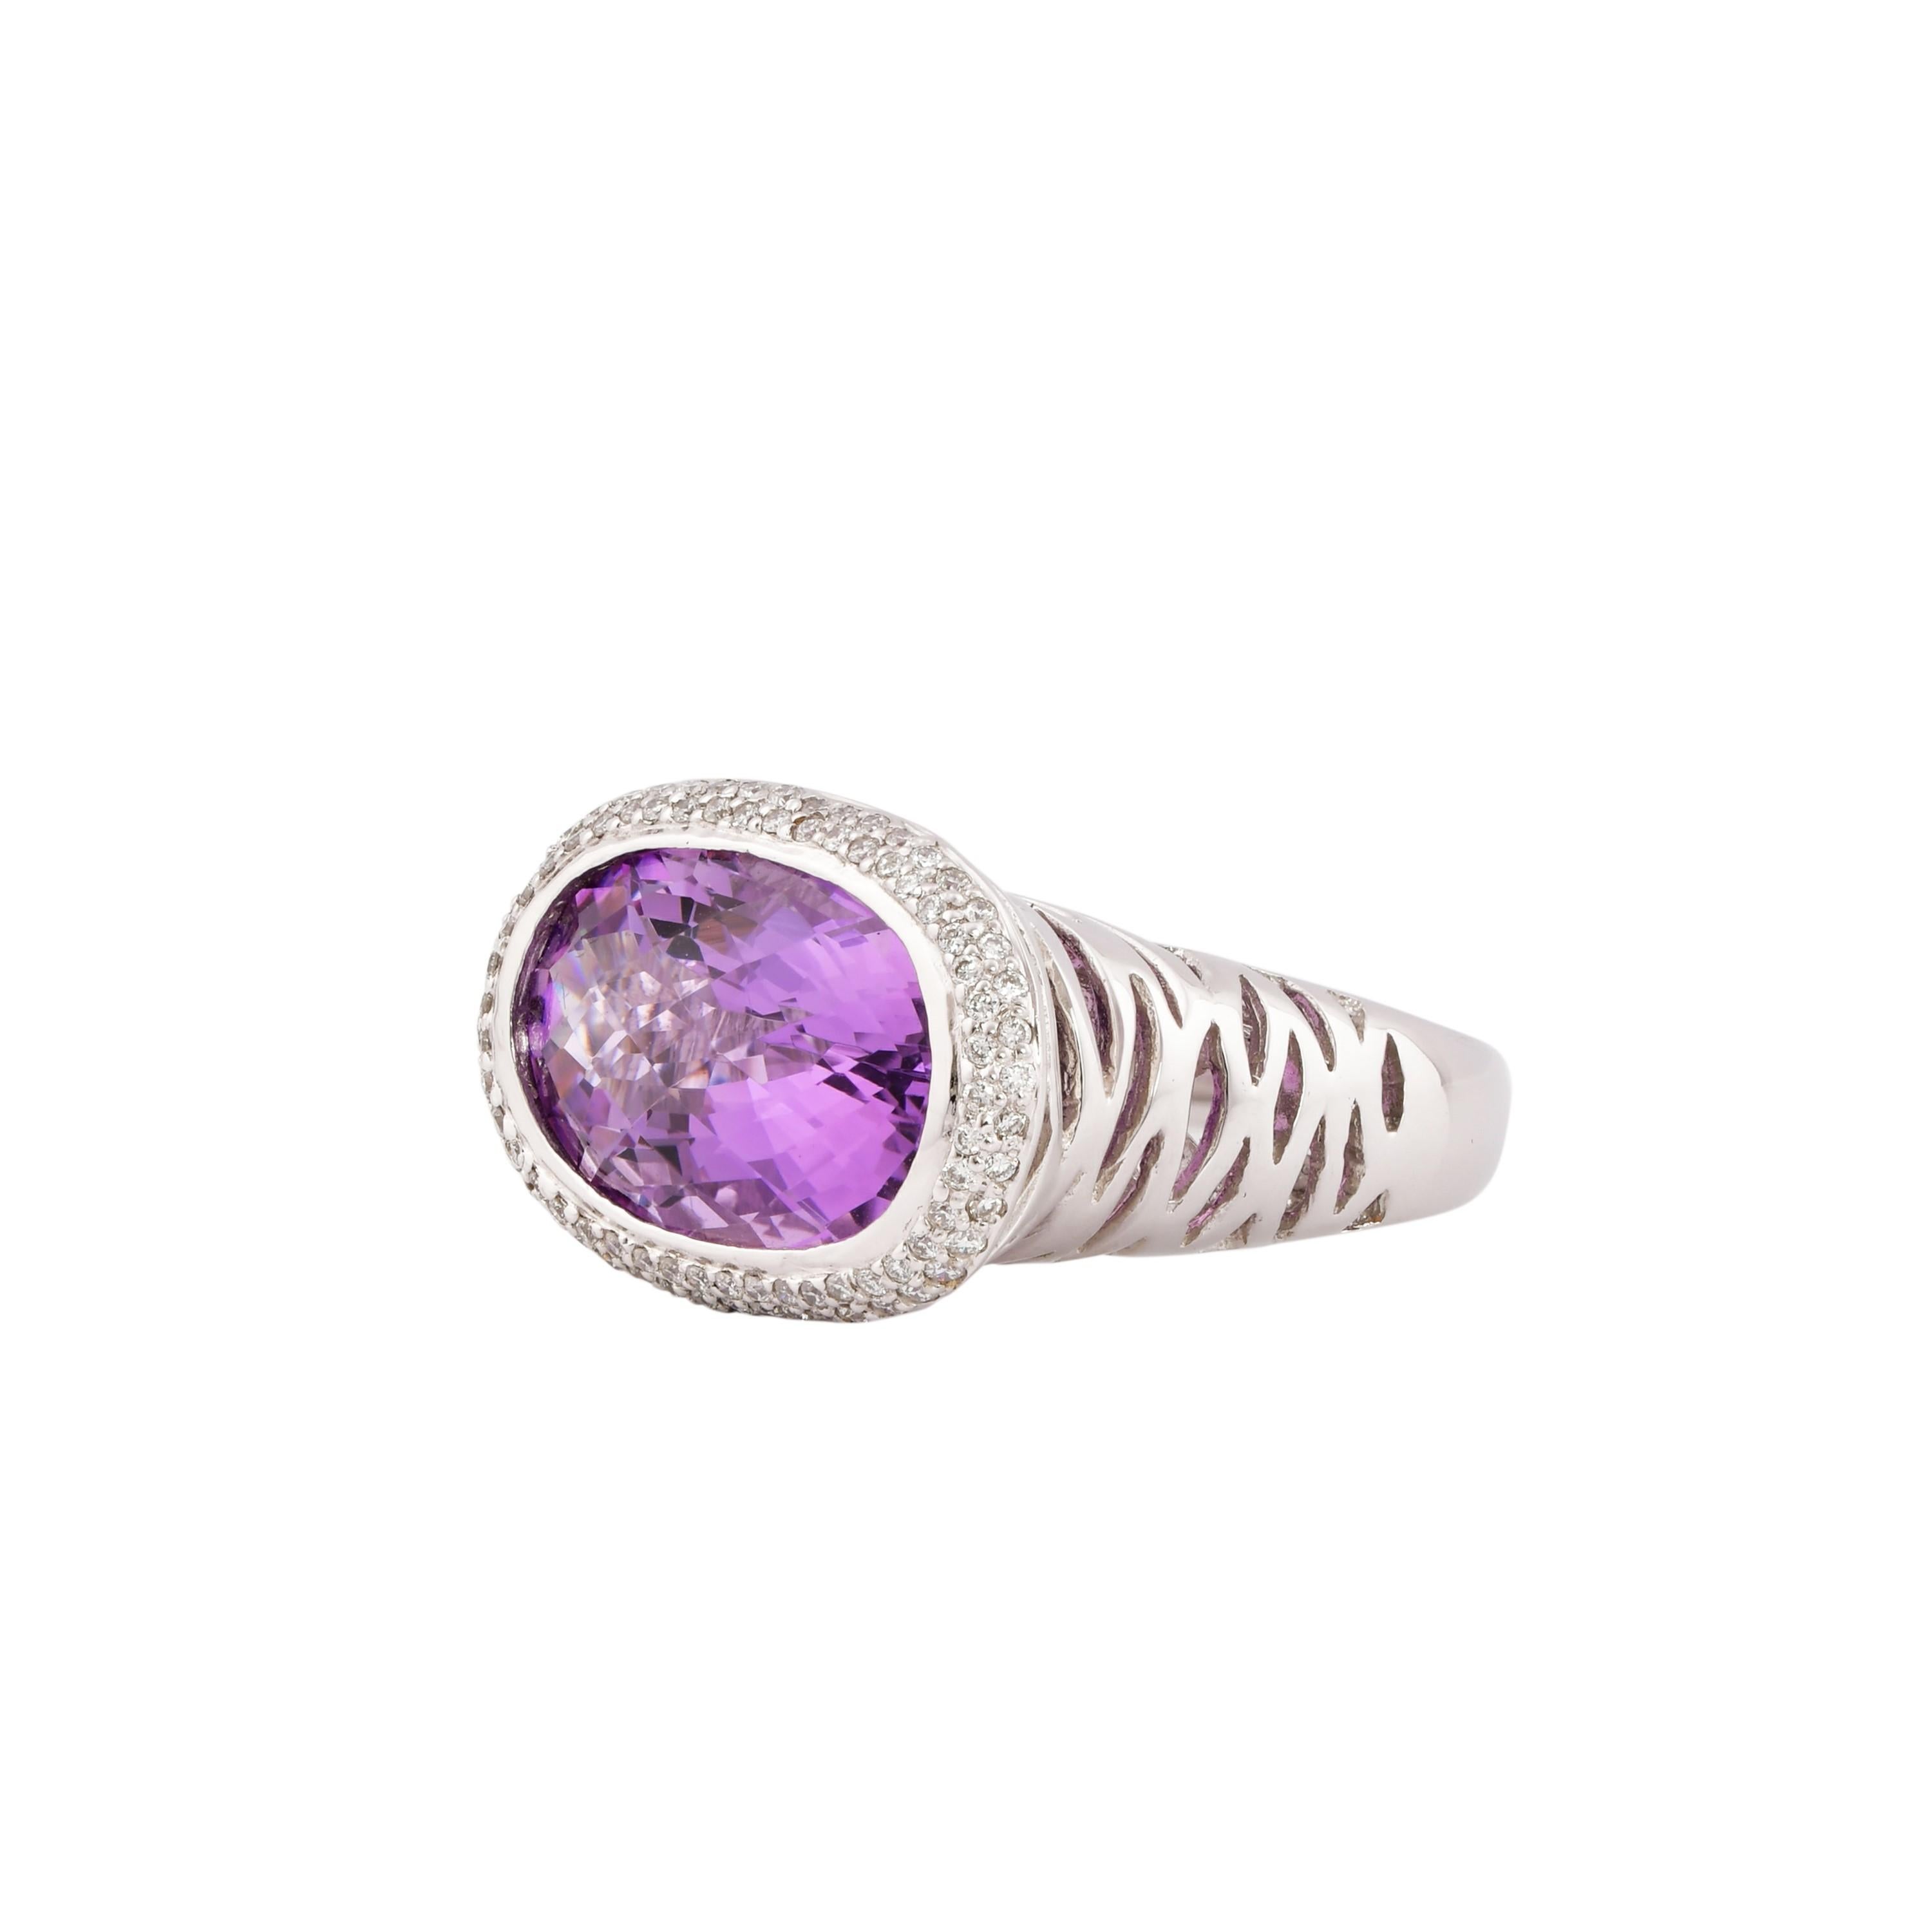 Contemporary 7.6 Carat Amethyst and Diamond Ring in 14 Karat White Gold For Sale